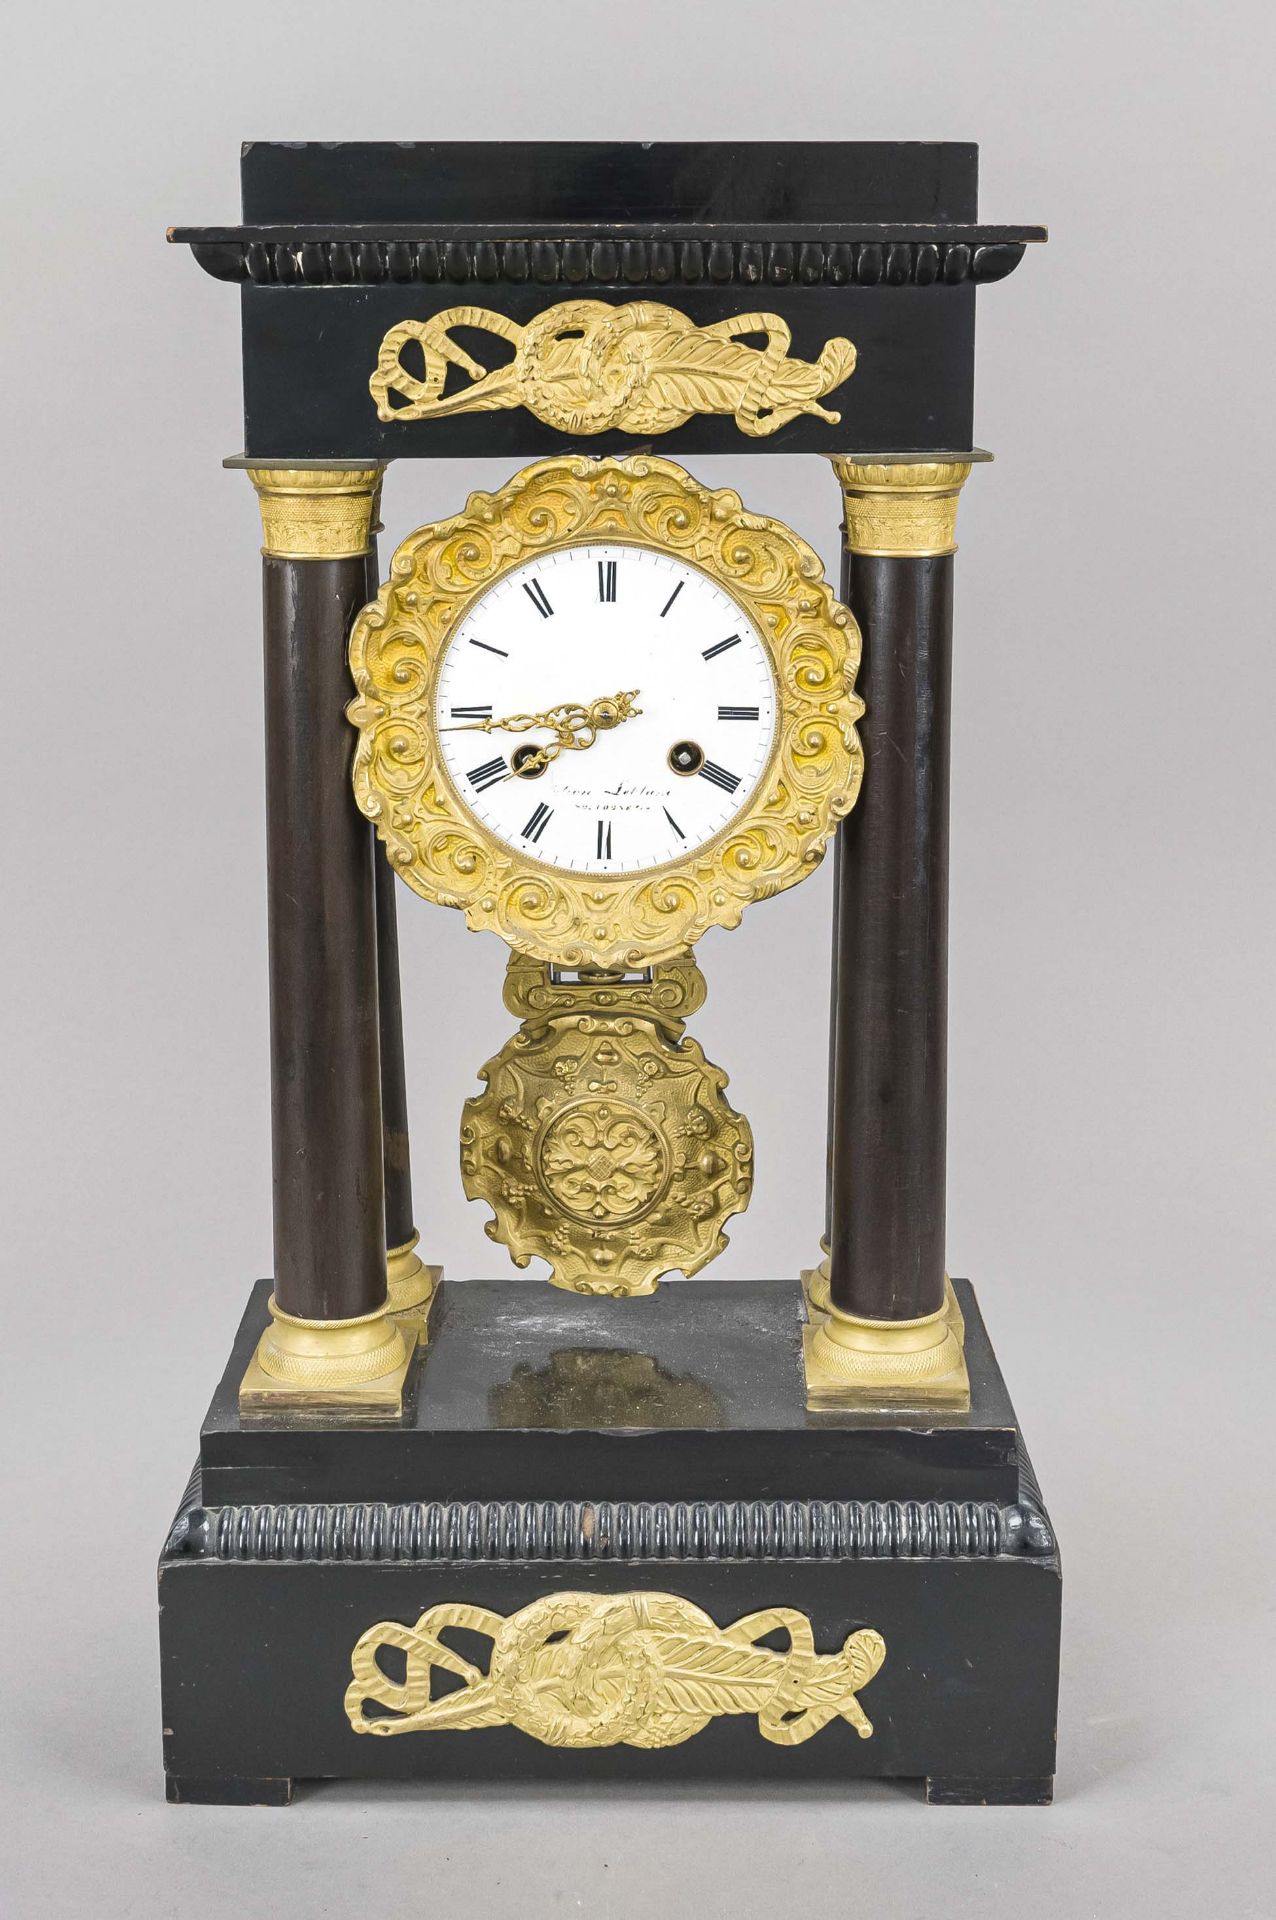 Portalu clock, 2nd half 19th century, ebonized wood, with gilded bases and capitals, gilded bronze